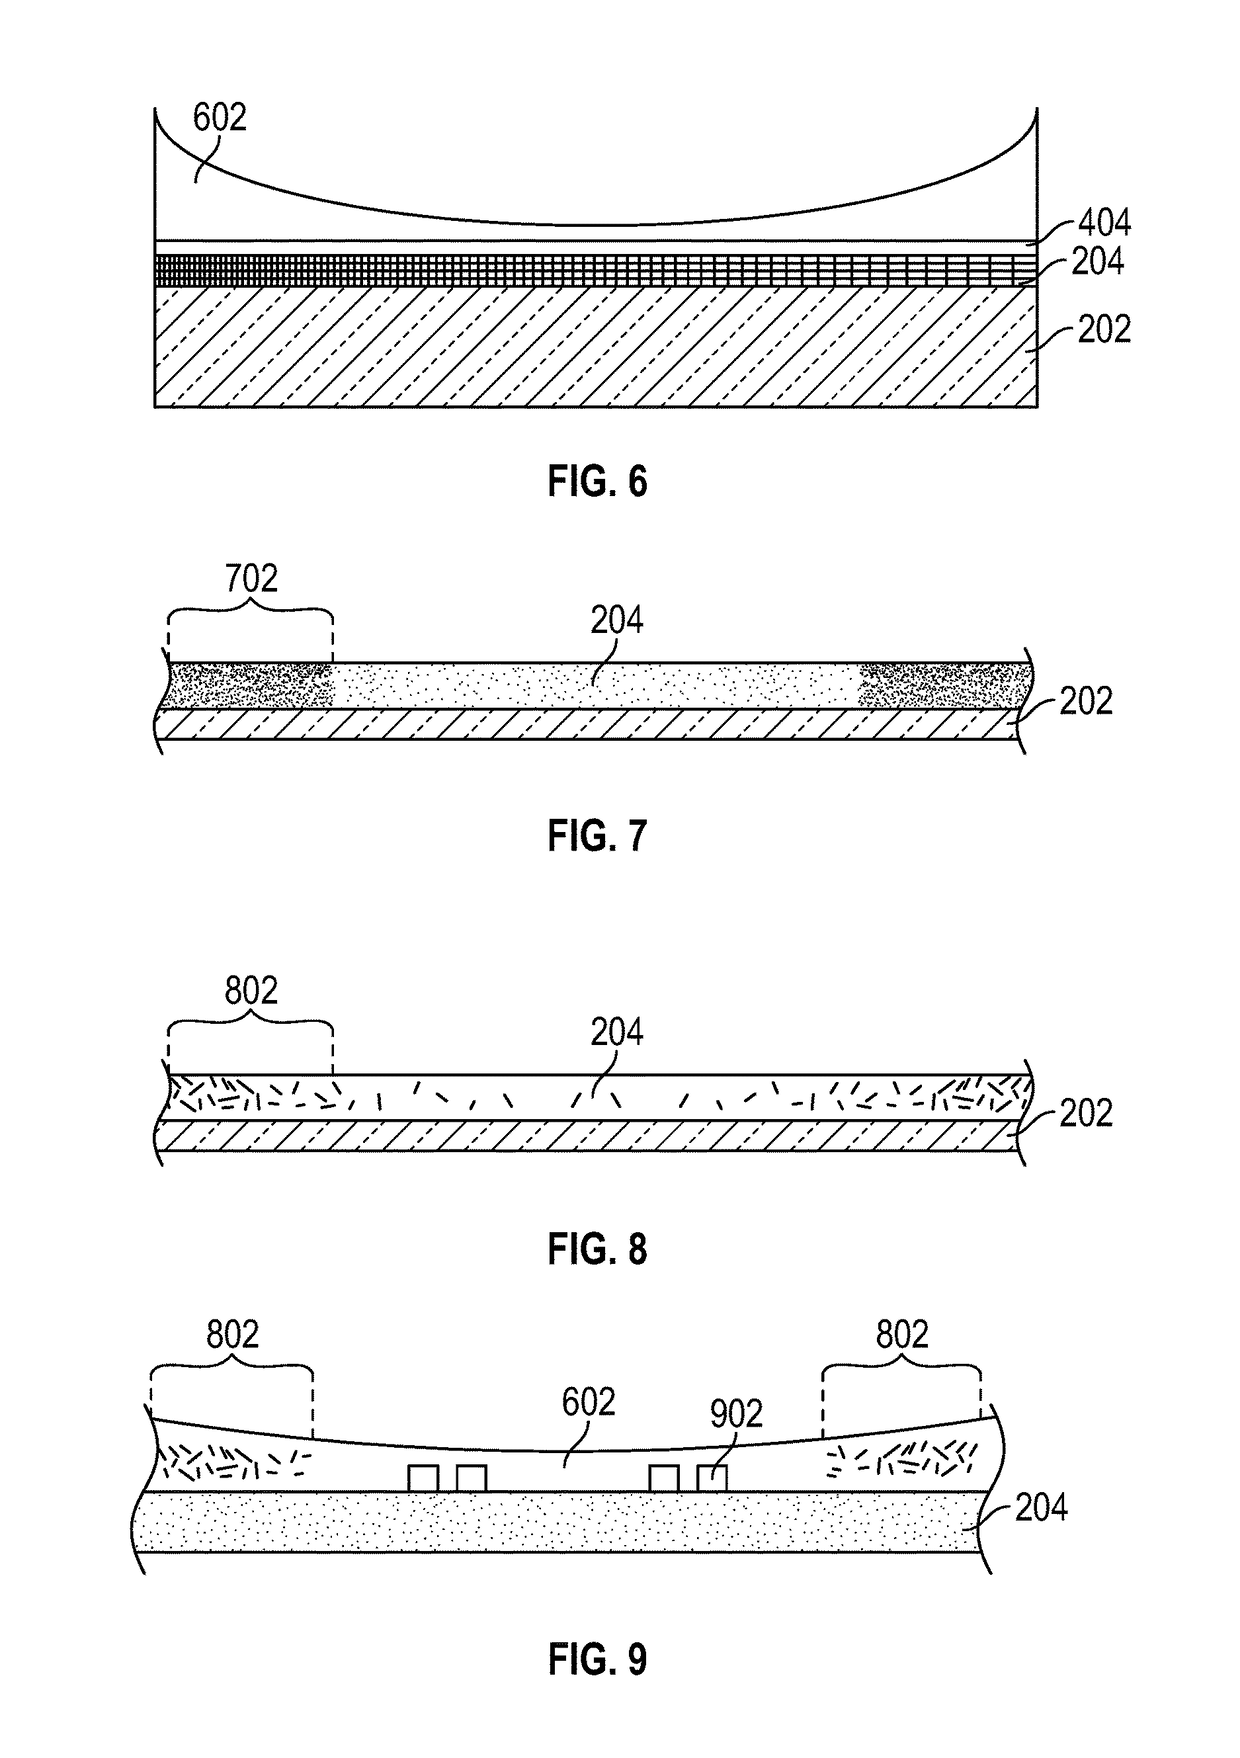 Manufacturing methods for a transparent conductive oxide on a flexible substrate